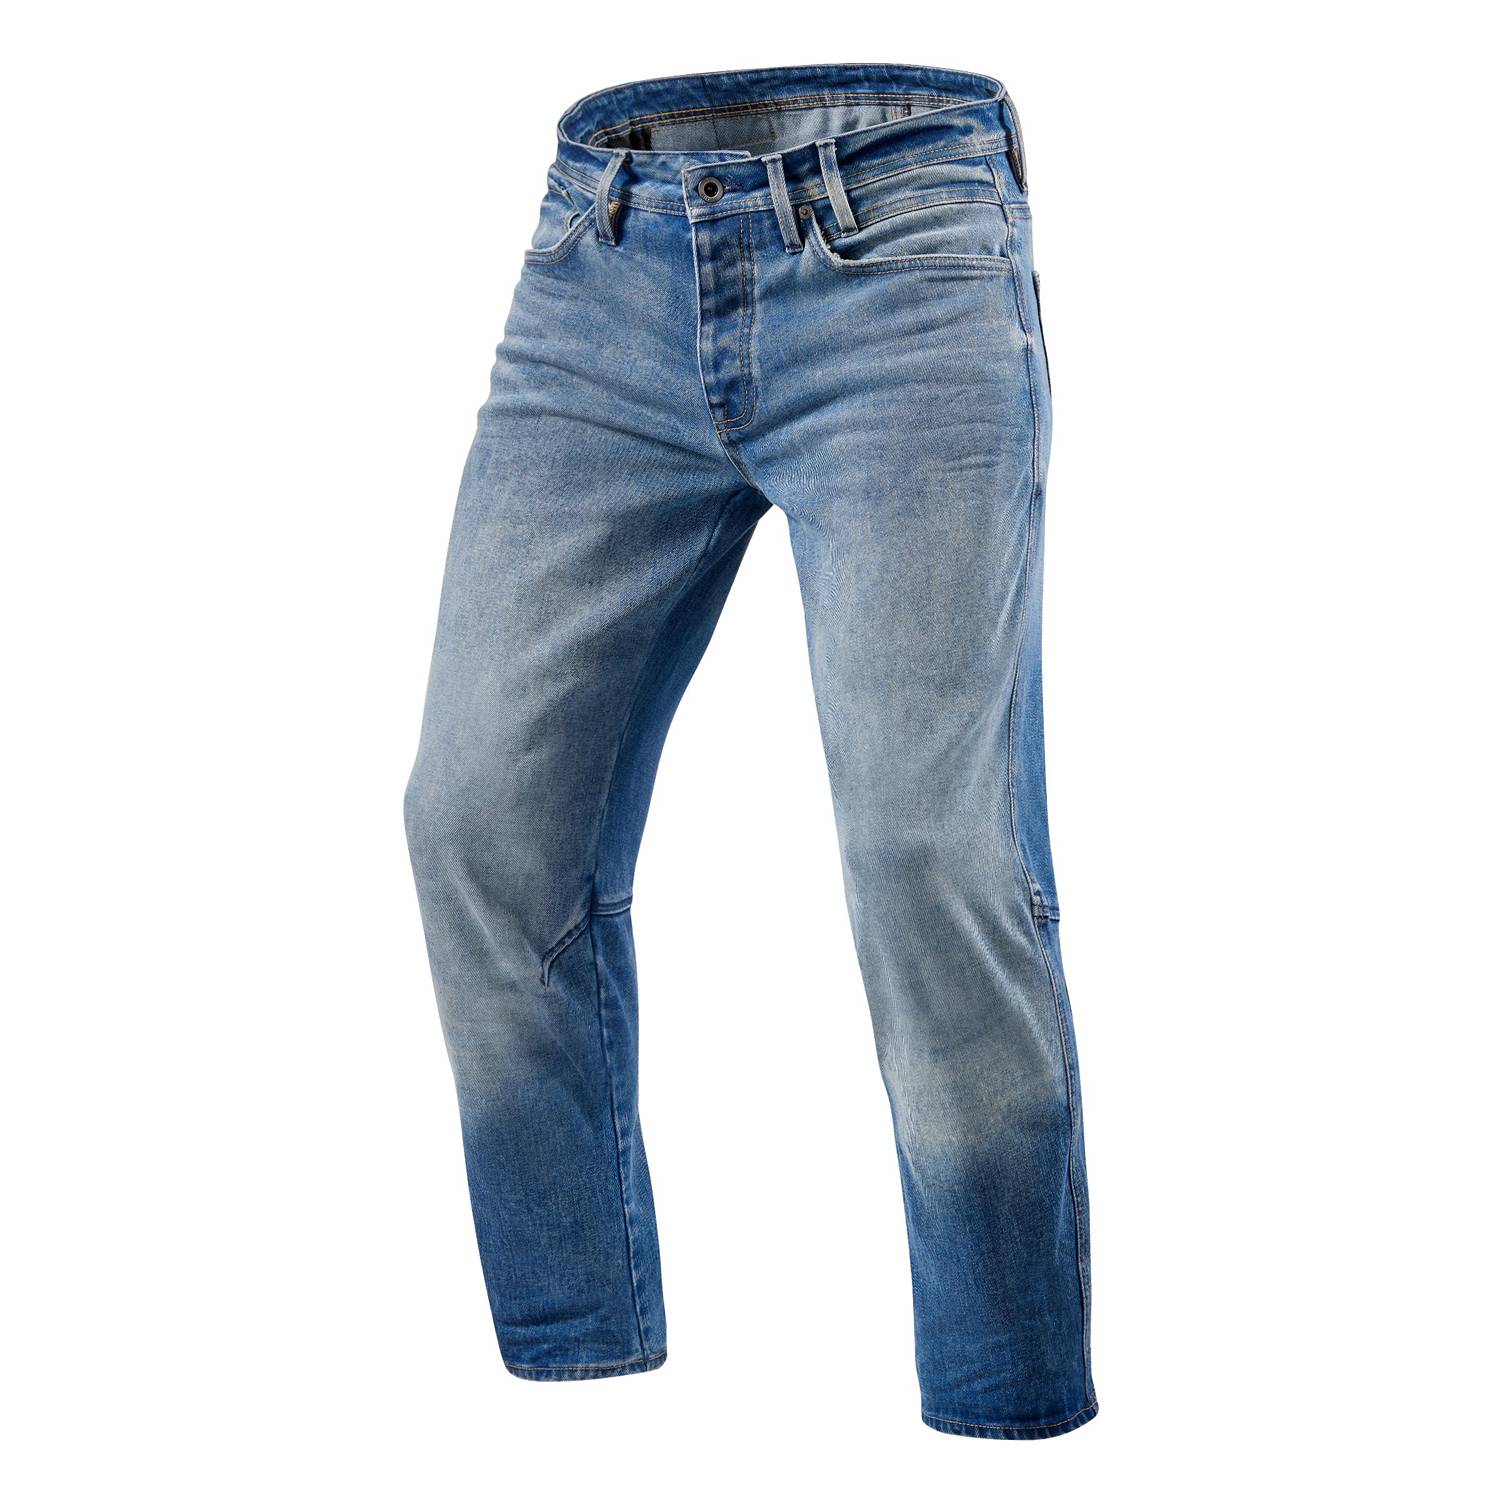 Image of REV'IT! Salt TF Mid Blue Used Motorcycle Jeans Talla L32/W31